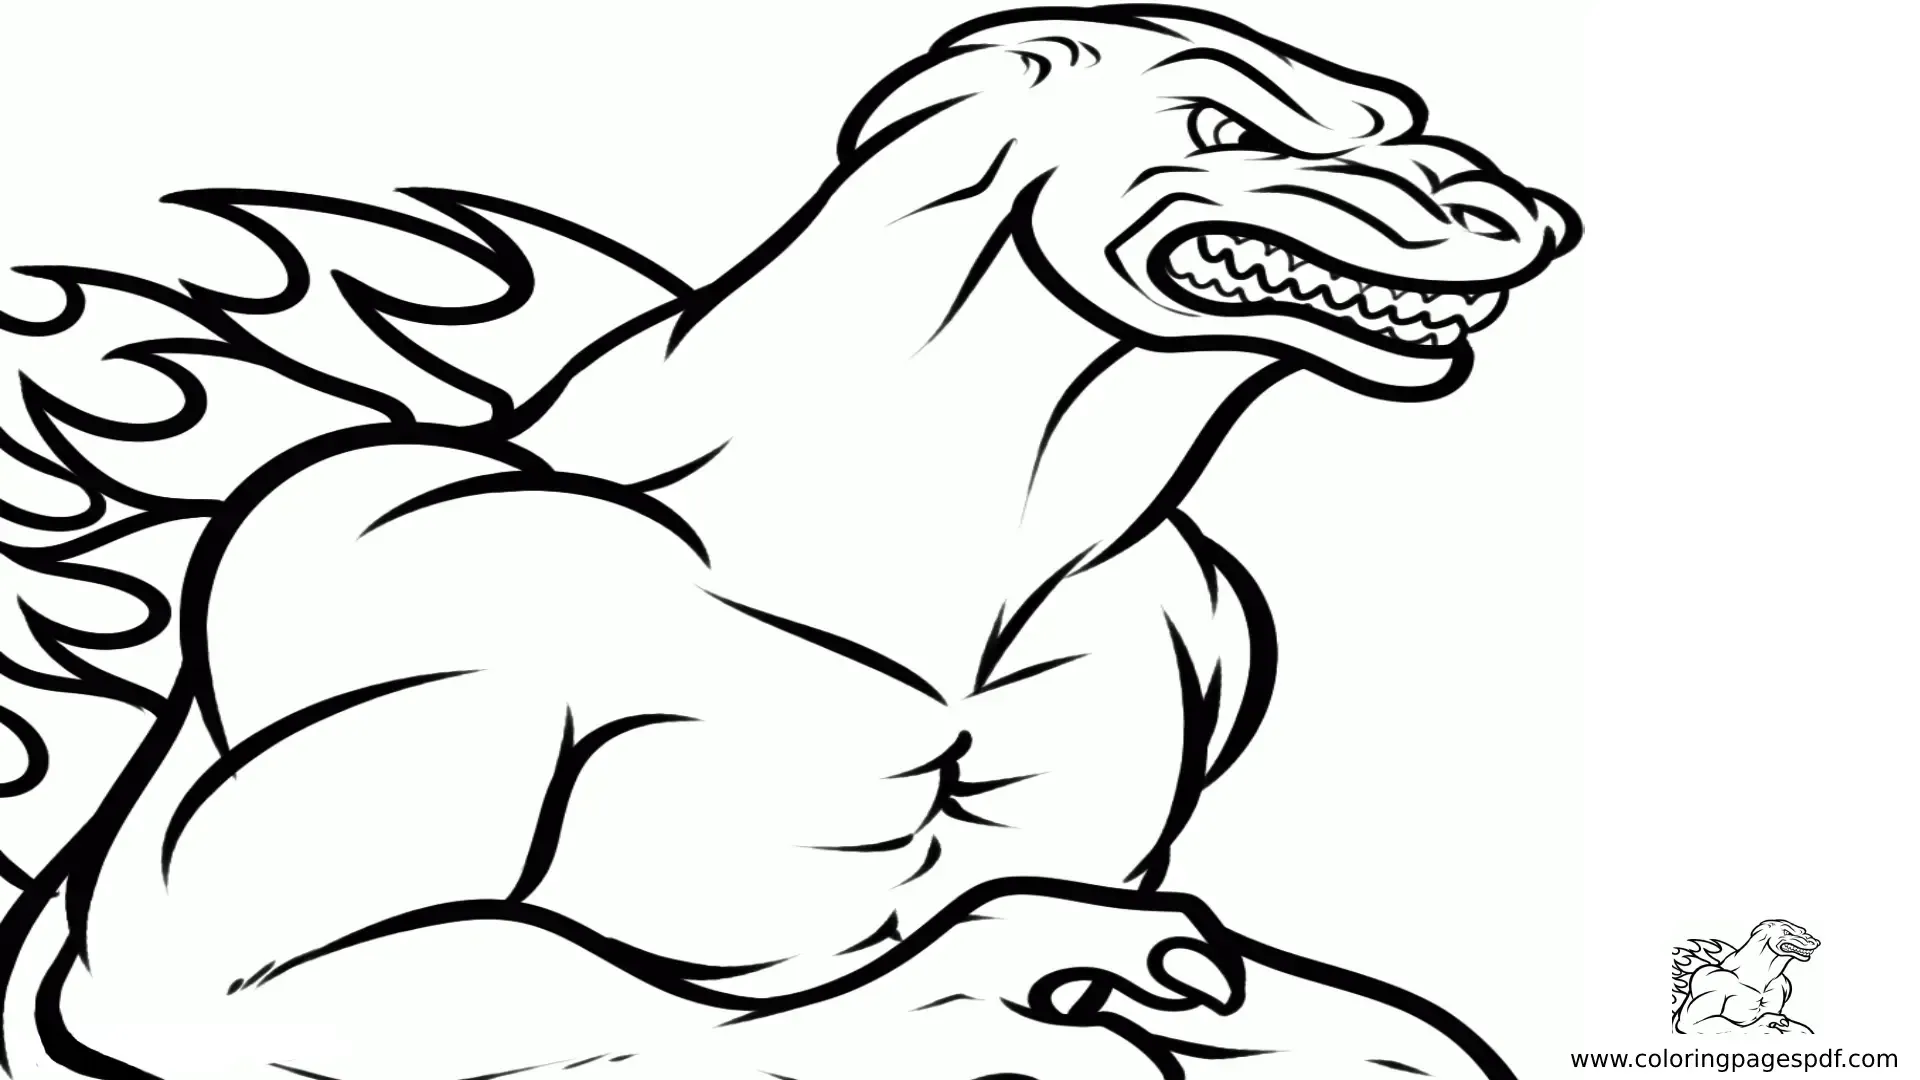 Coloring Pages Of Muscular Godzilla